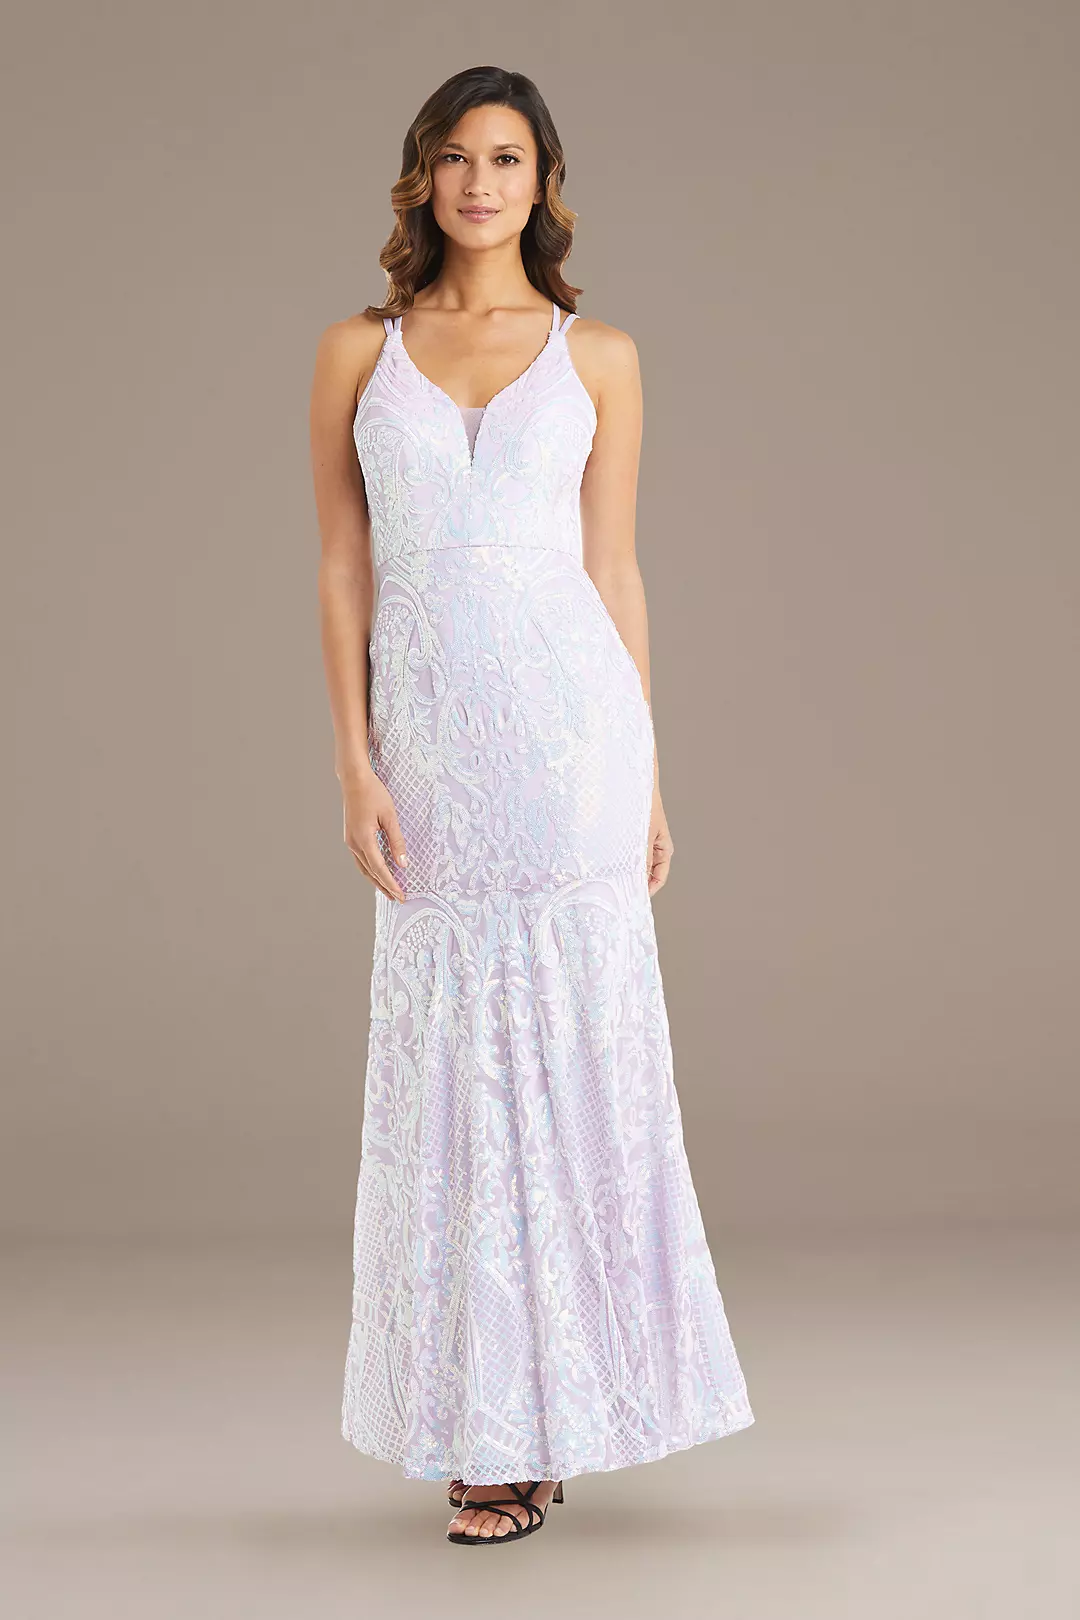 Iridescent Sequin Filigree Gown with Strappy Back Image